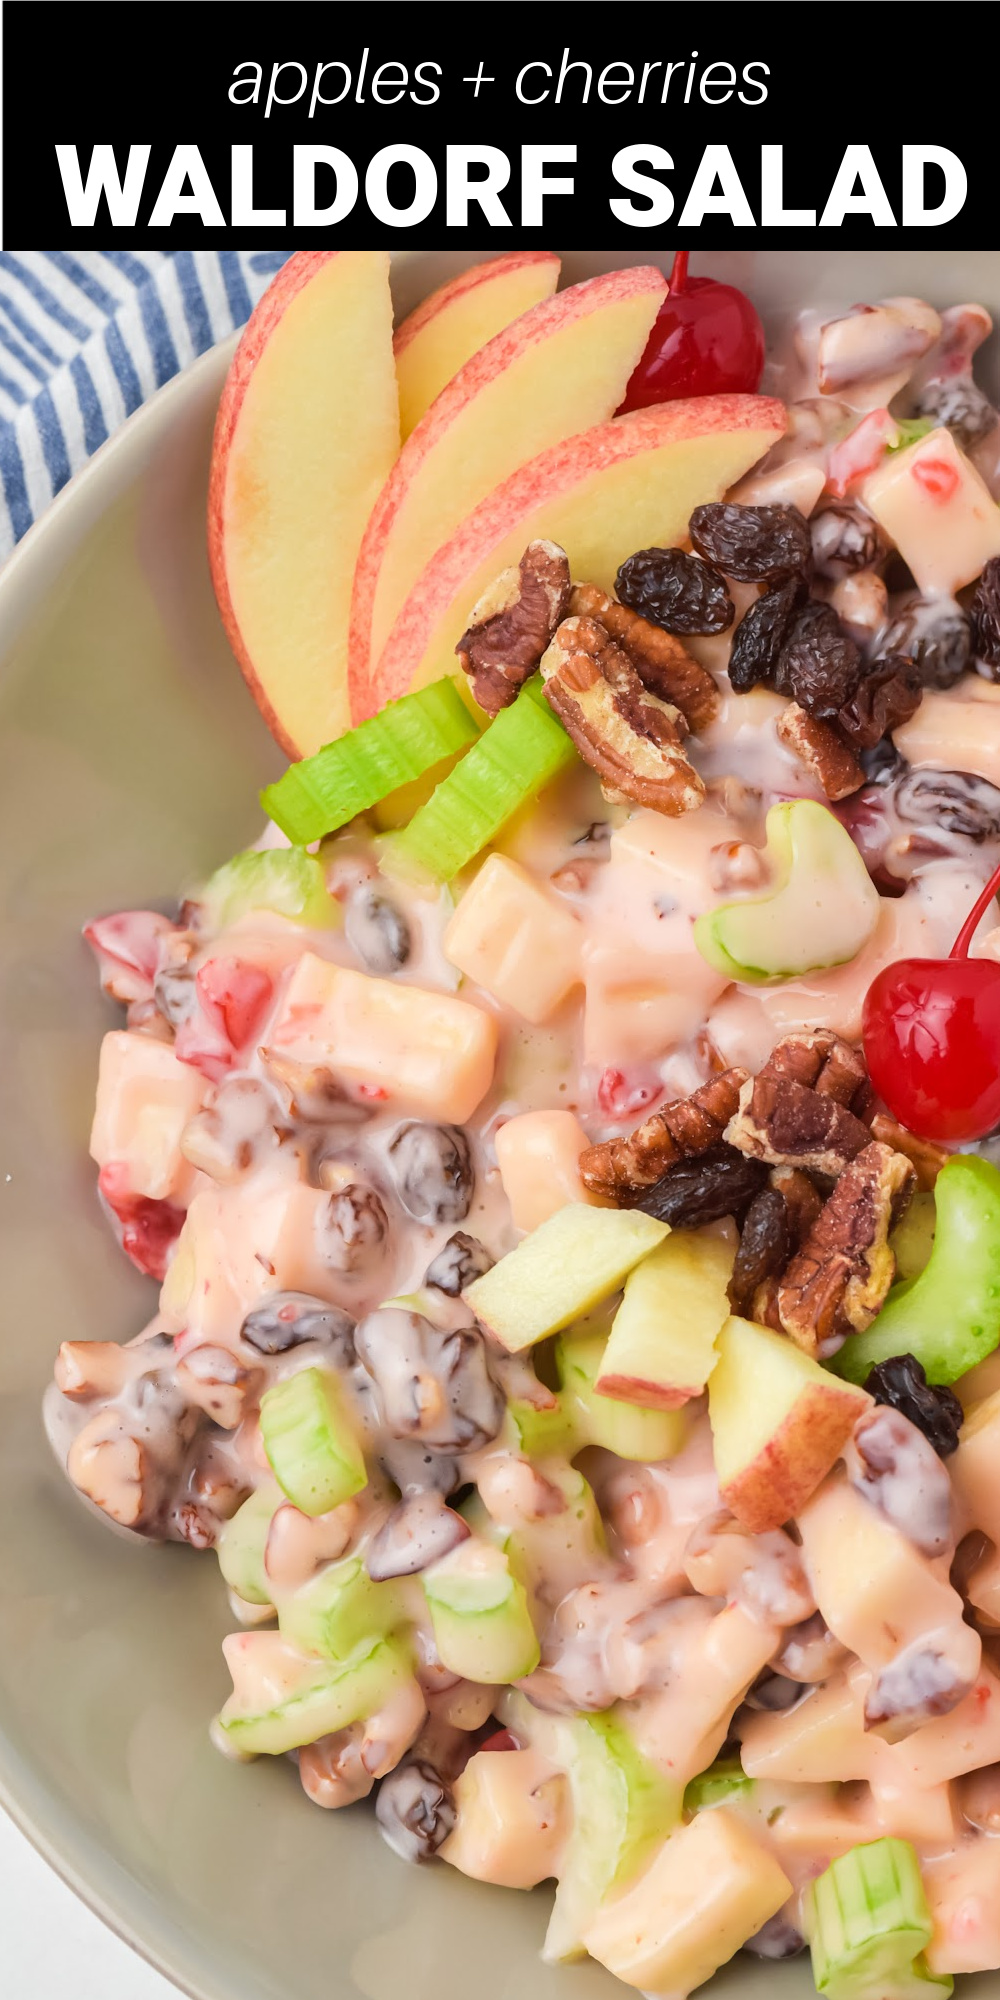 This super simple and delicious Waldorf Salad is full of sweet and crispy apples, crunchy celery and a rich and creamy dressing. It’s easy side dish that makes a great addition to holiday meals, backyard BBQs or just when you’re craving a fresh fruit salad. 